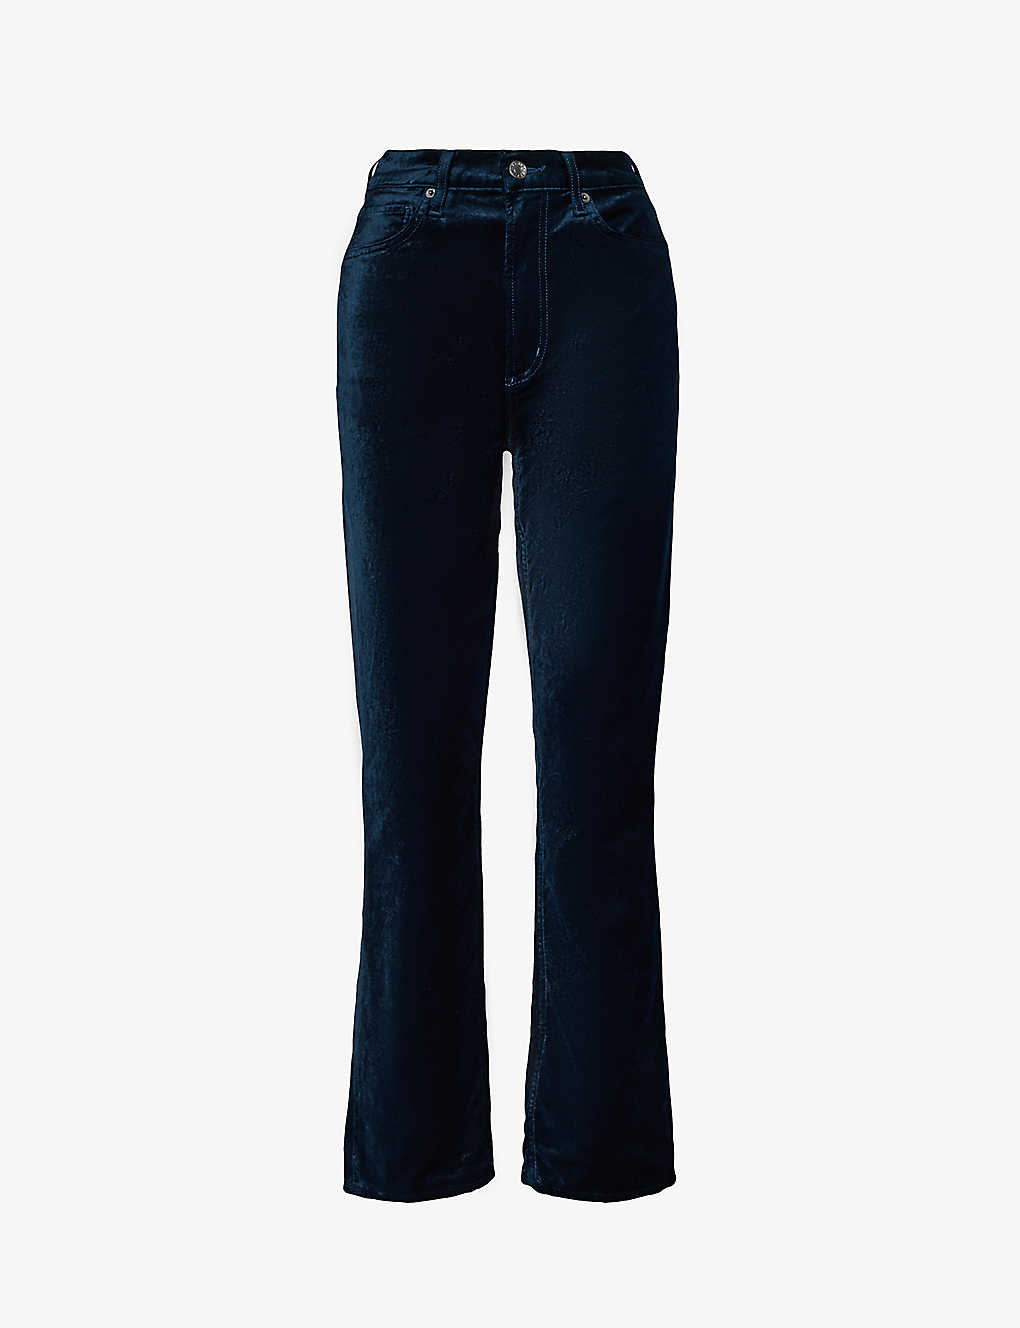 Shop Agolde Women's Blizzard (jewel Teal) Stovepipe High-rise Cotton-blend Velvet Trousers